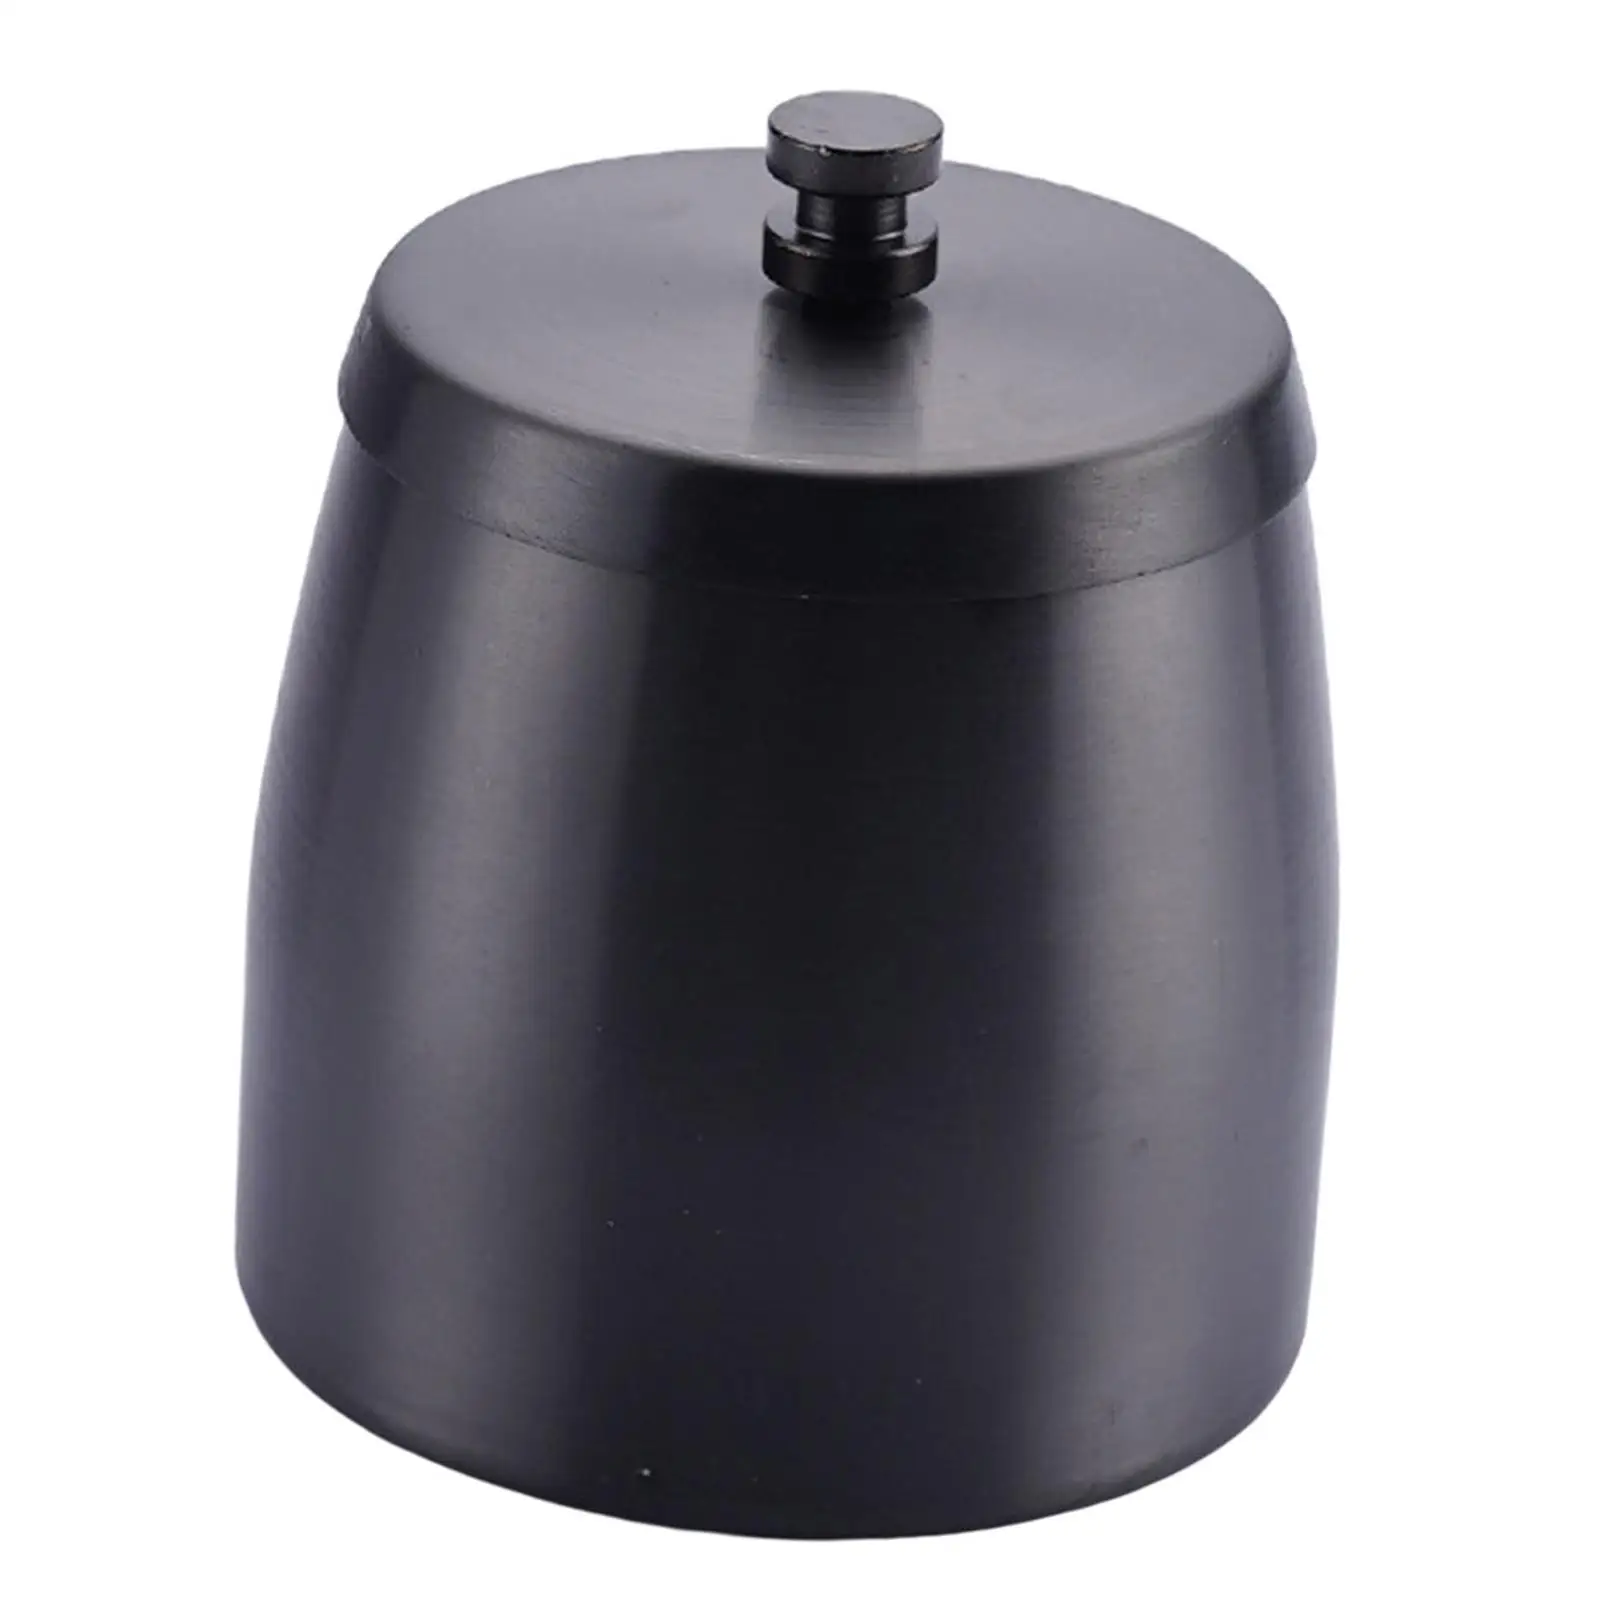 Stainless Steel Cigarette Ashtray Cigarette Ash Tray for Outside Indoor Office Tabletop